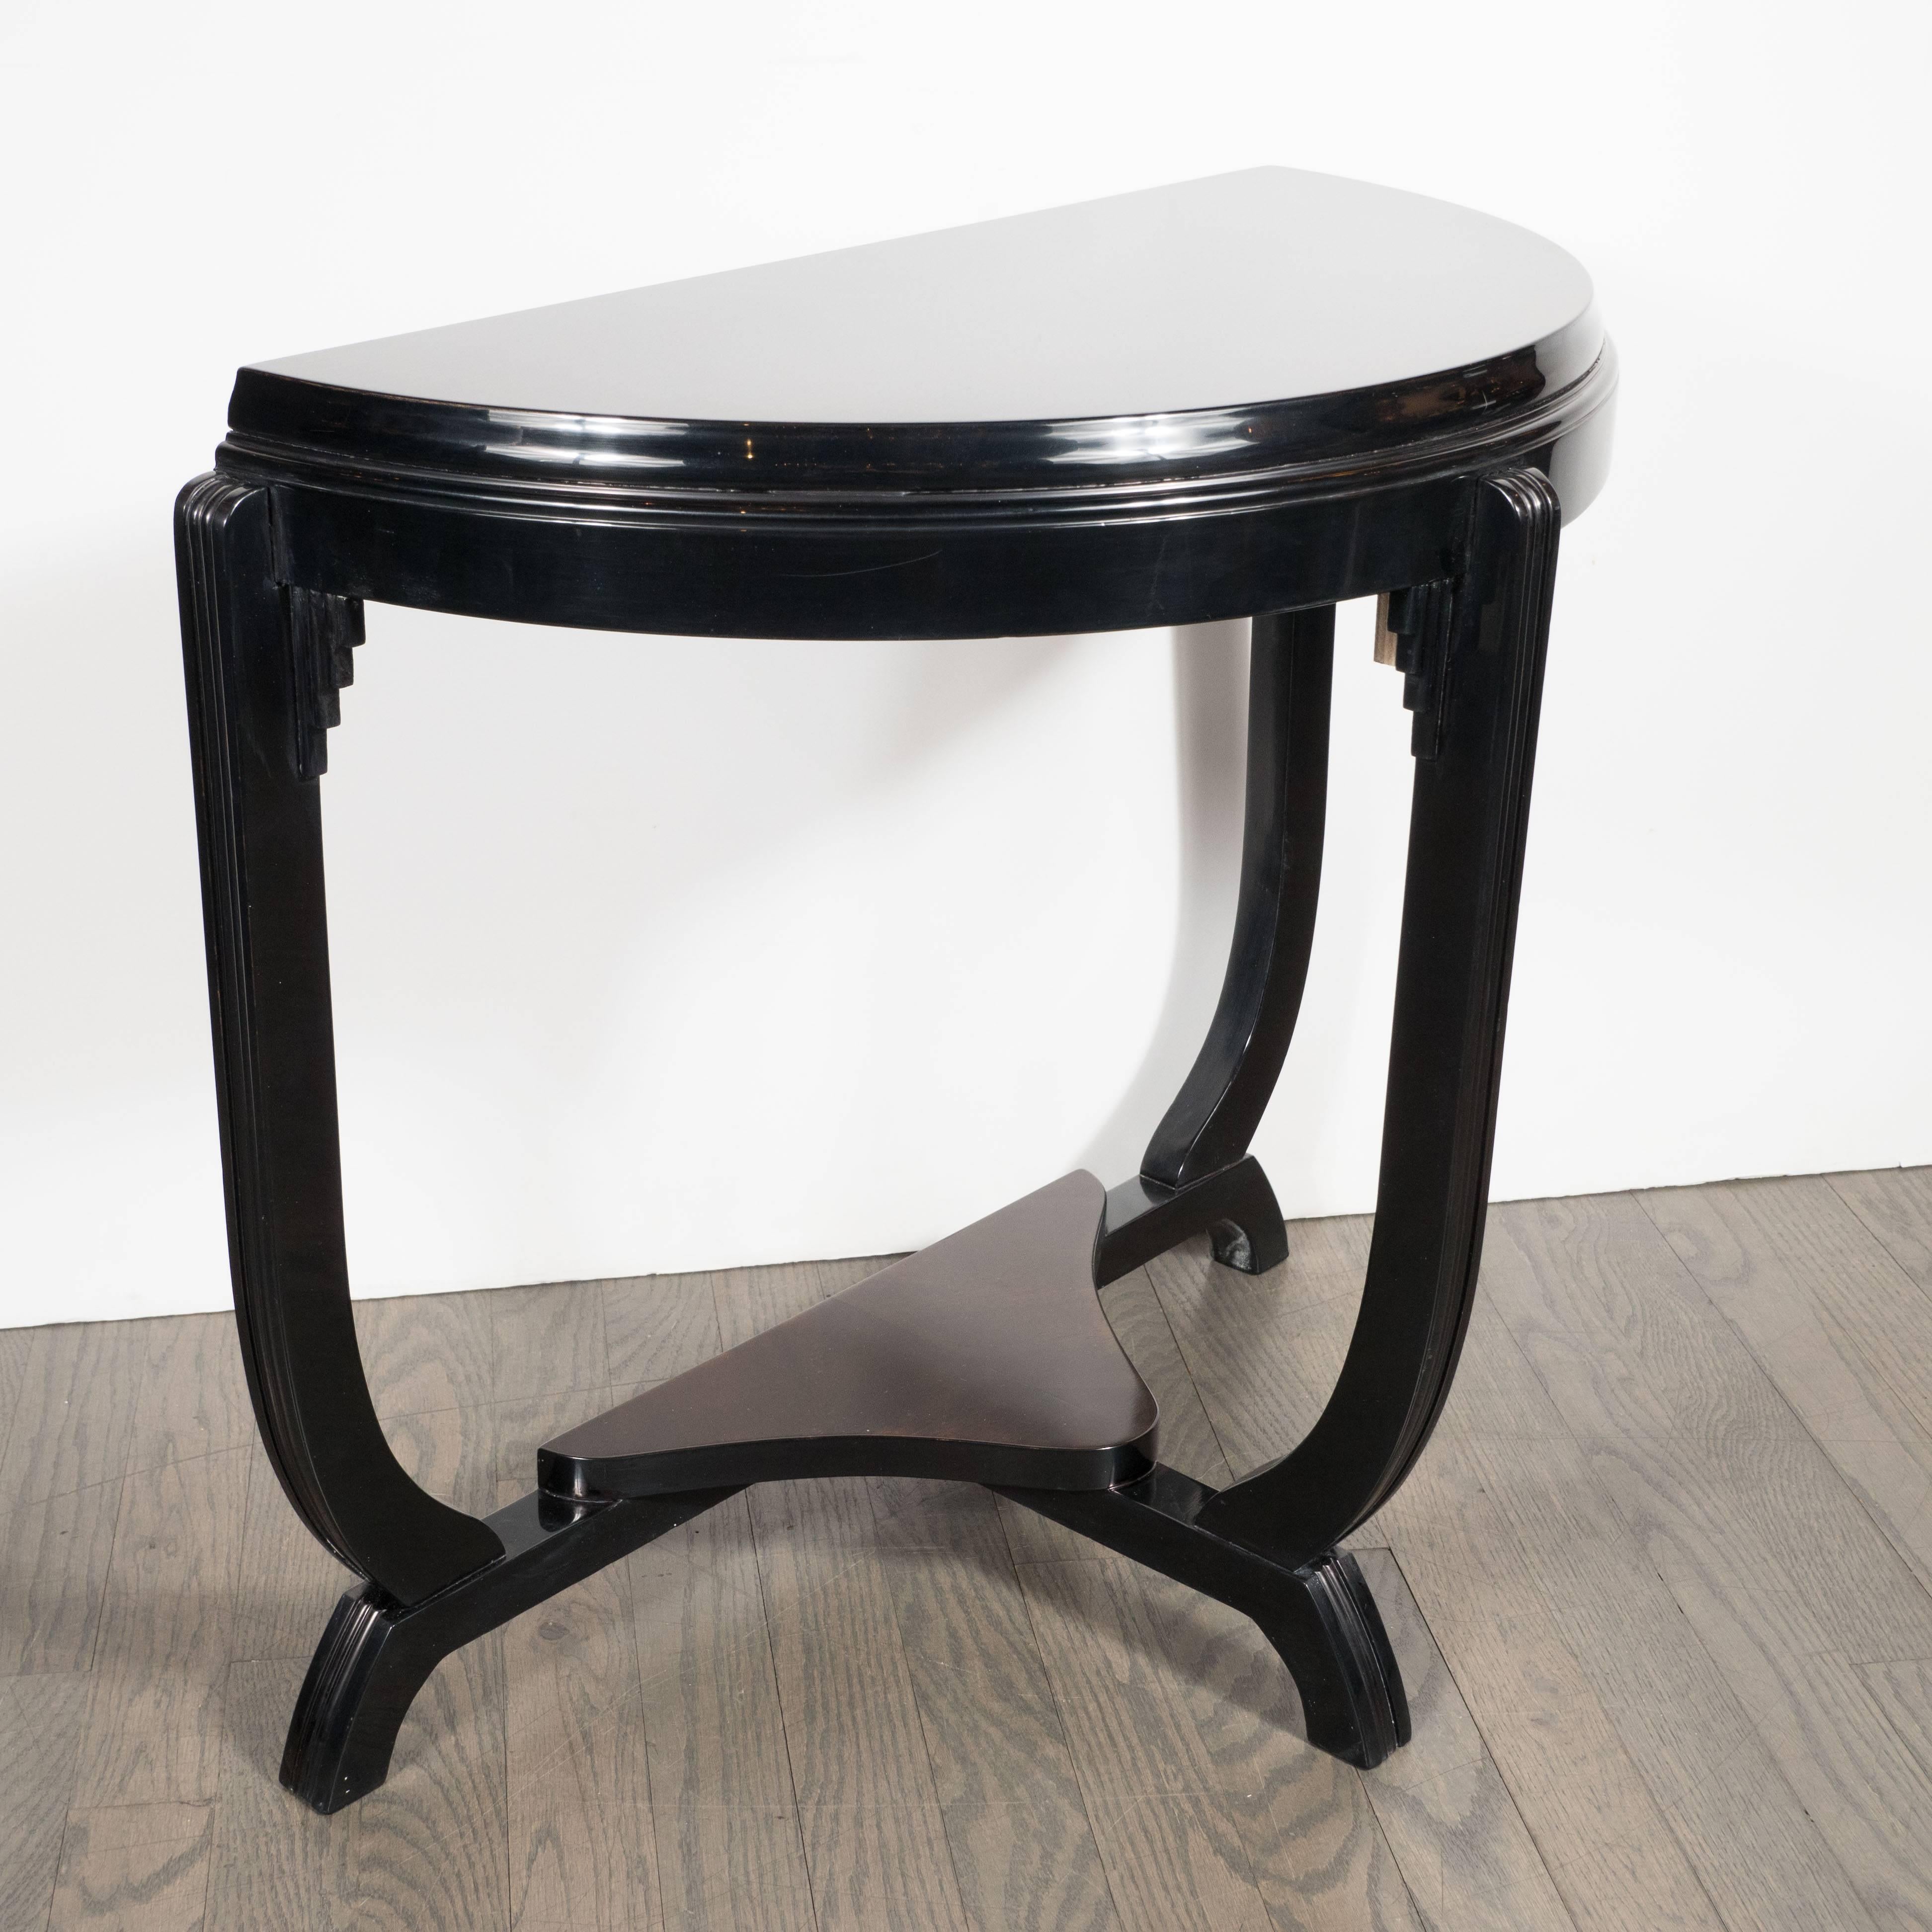 This streamline demilune table, composed of book-matched burled walnut and mahogany, features stunning details including the skyscraper style embellishments at the joints, finely striated buttresses, and ebonized details. The top features an inlaid